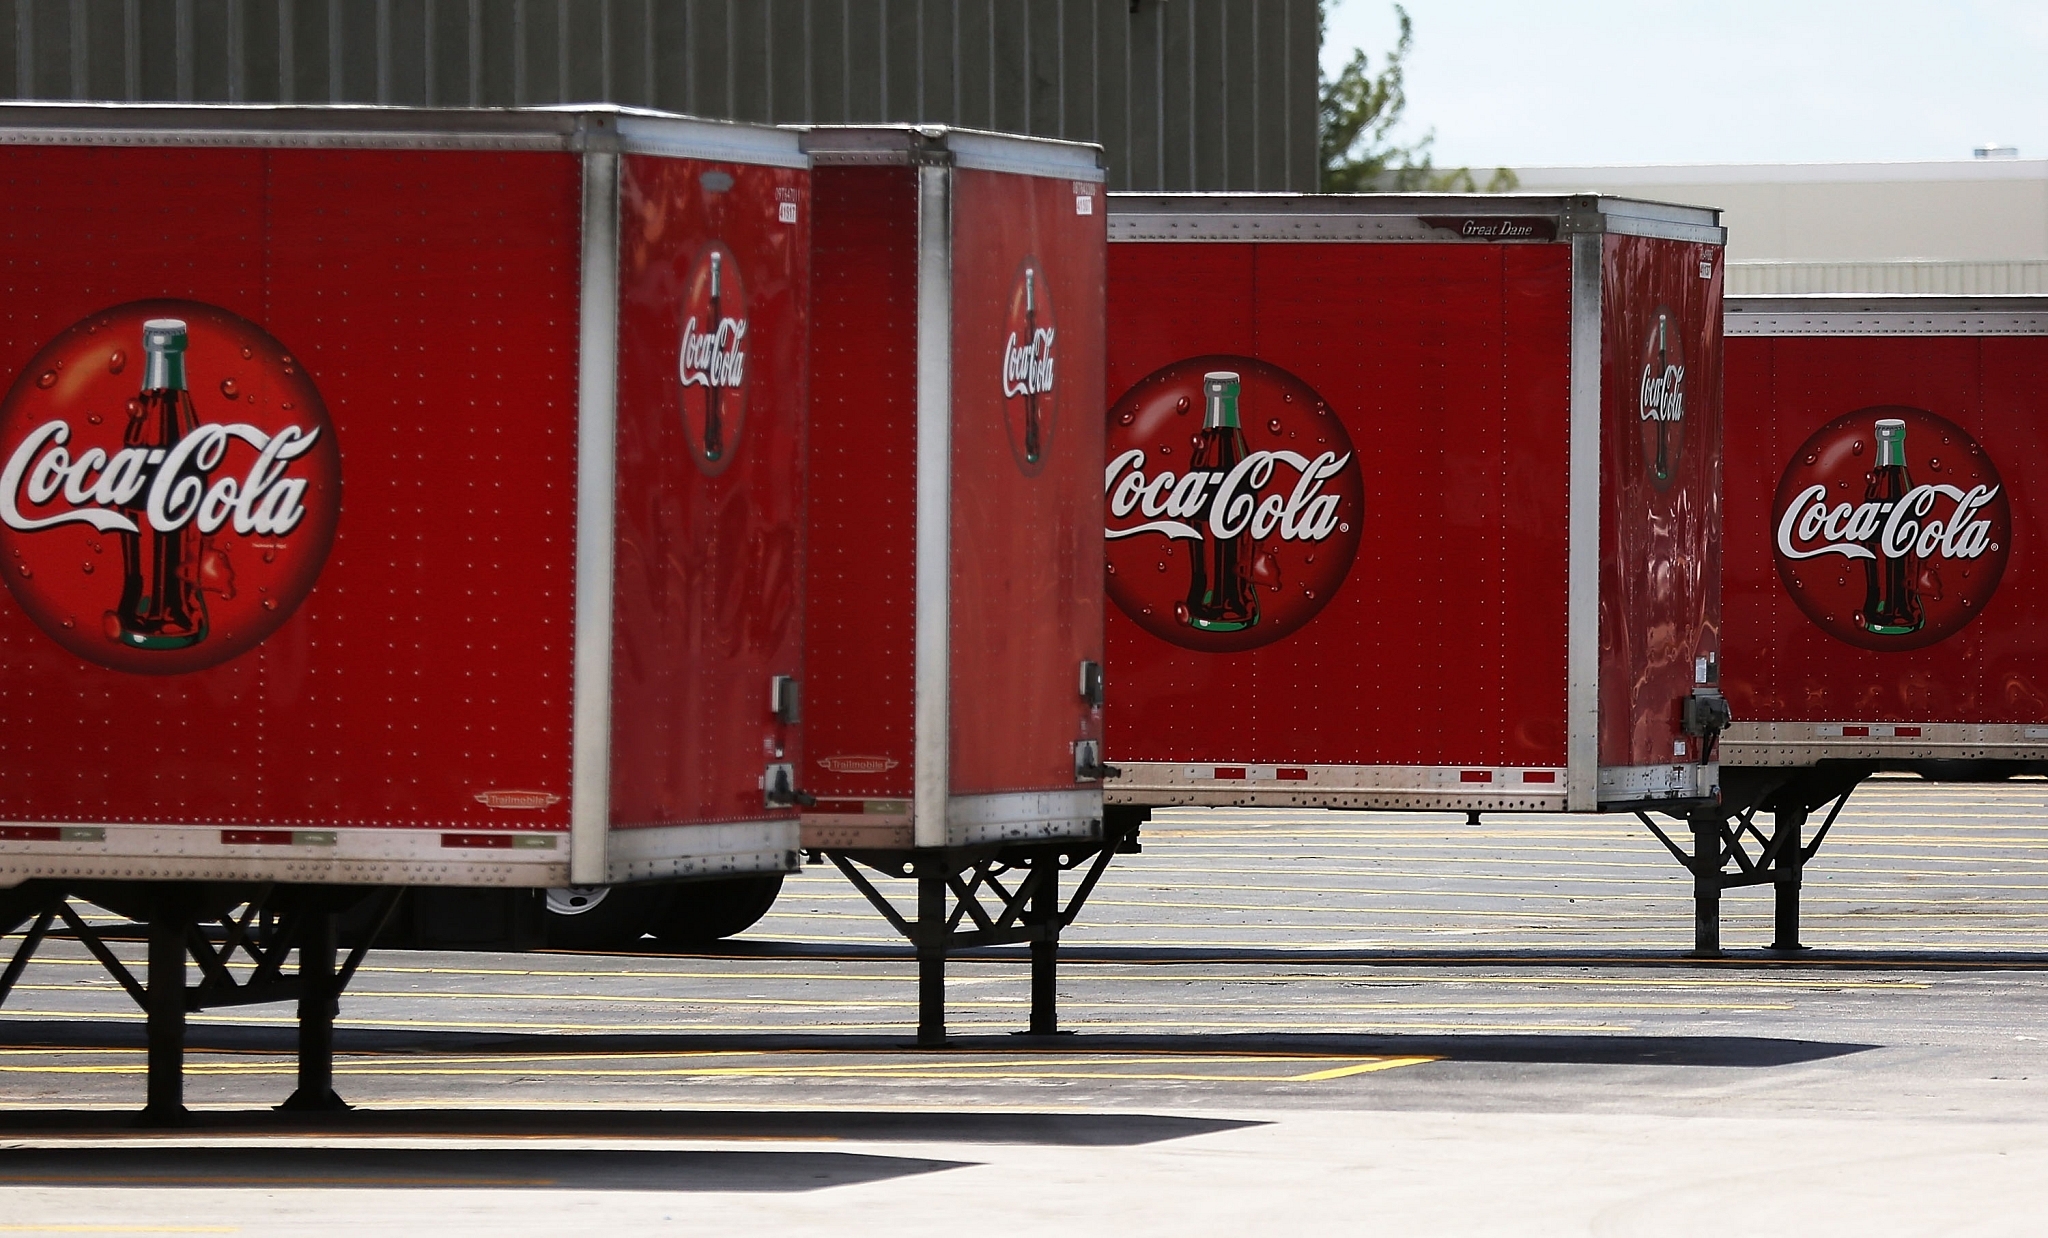 Coca Cola trucks are seen at a distribution center. (Joe Raedle/Getty Images)